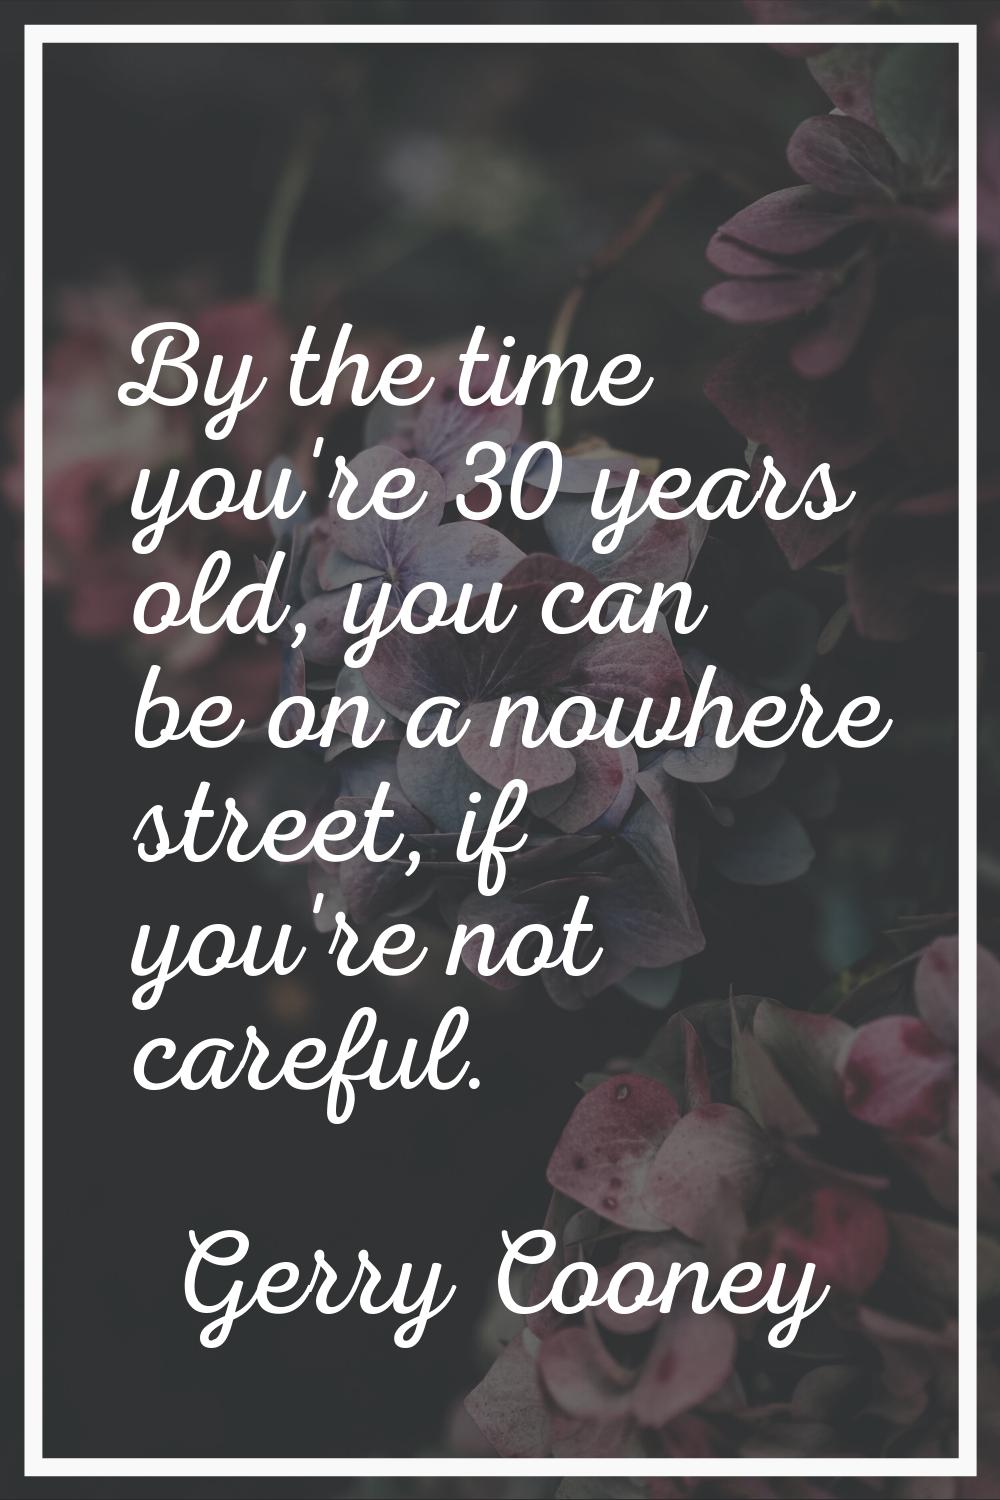 By the time you're 30 years old, you can be on a nowhere street, if you're not careful.